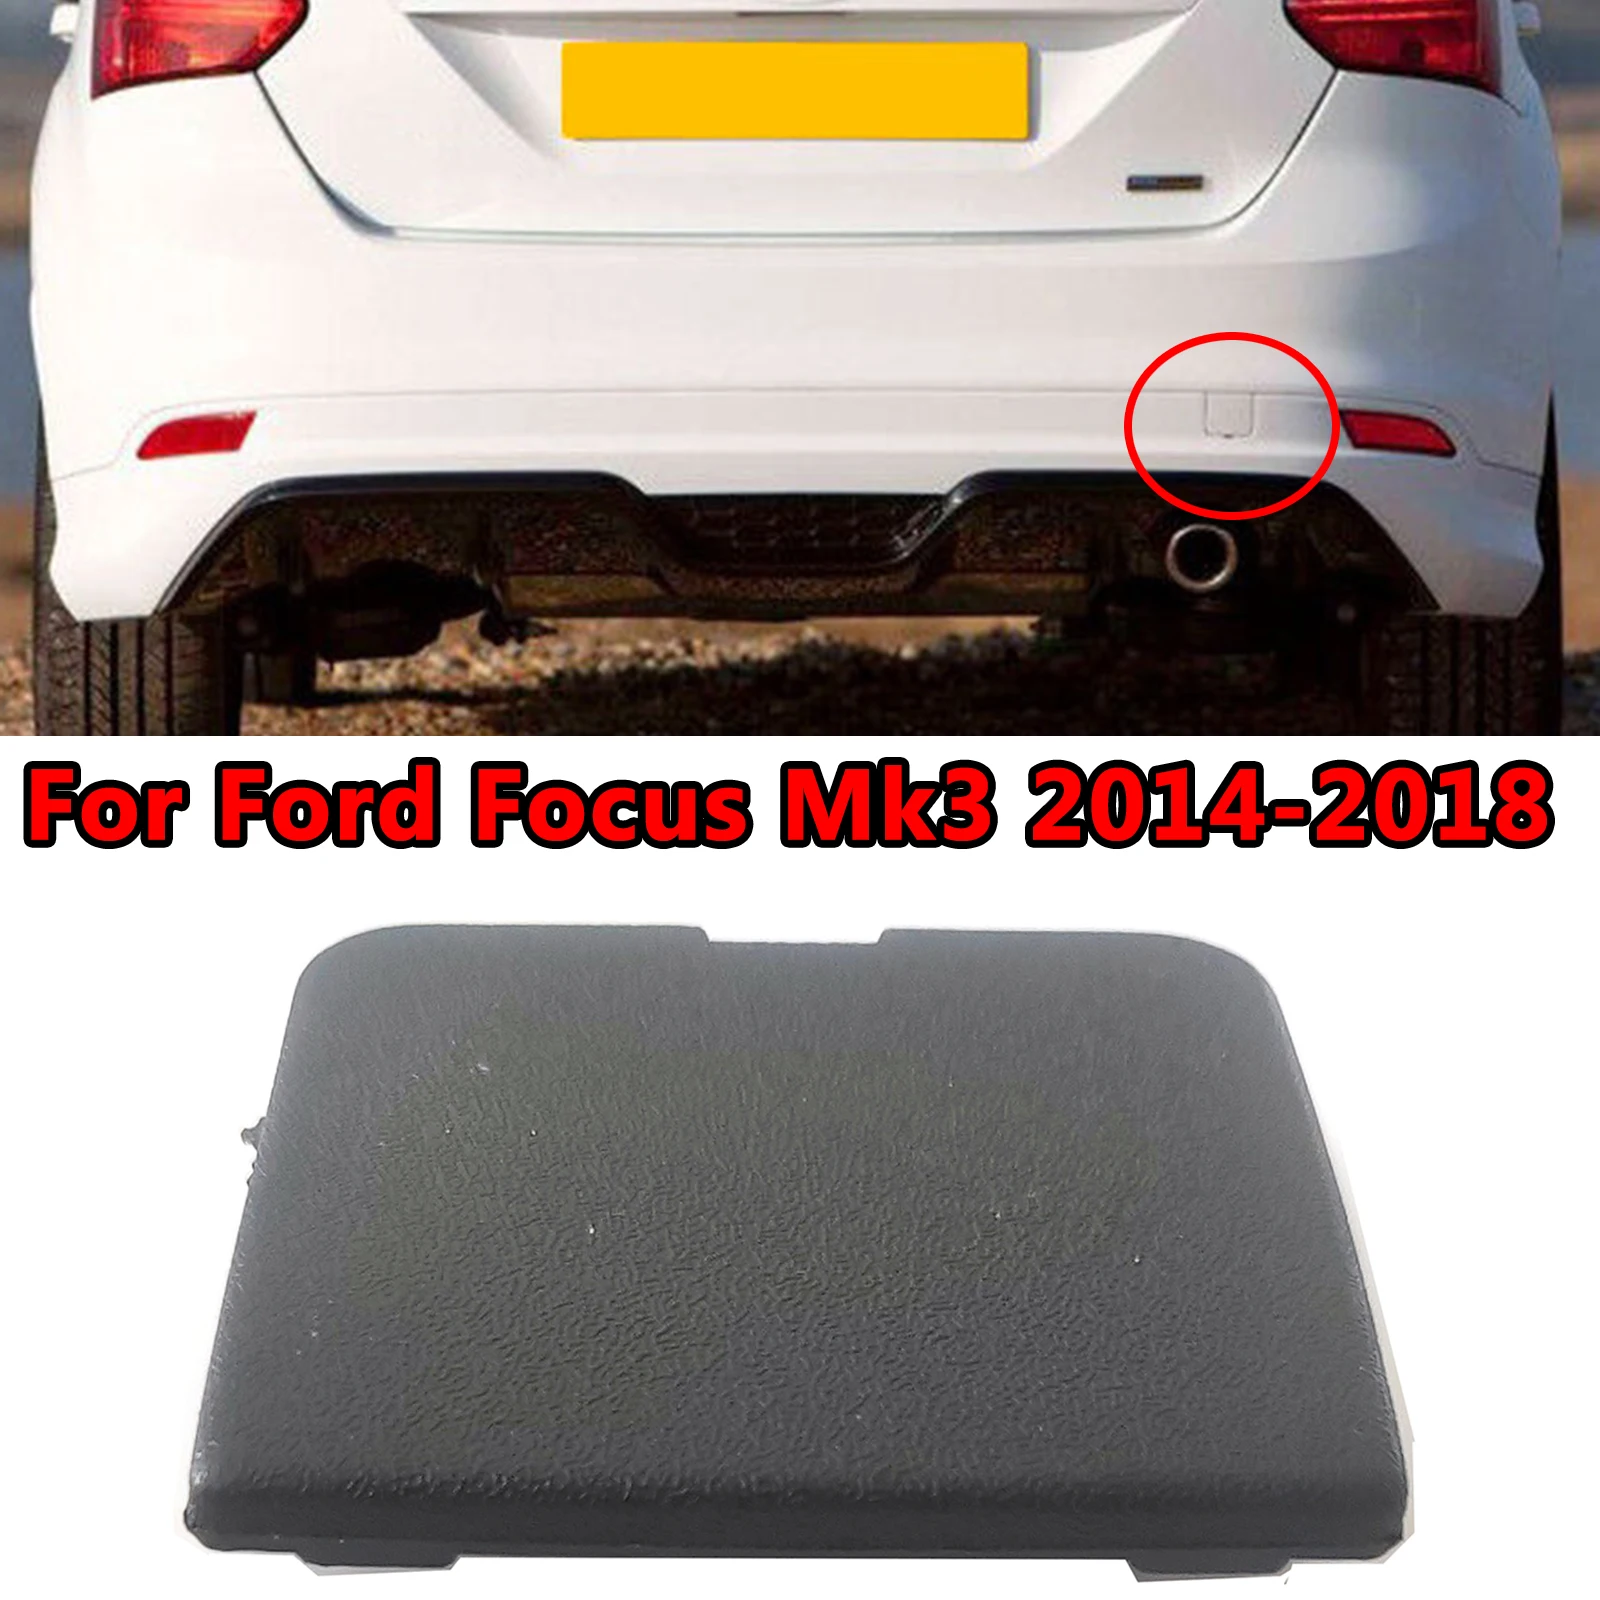 

For Ford Focus Mk3 Hatchback 2014 2015 2016 2017 2018 Car Replacement Rear Bumper Hook Eye Tow Cover Cap Car Accessories 1872237